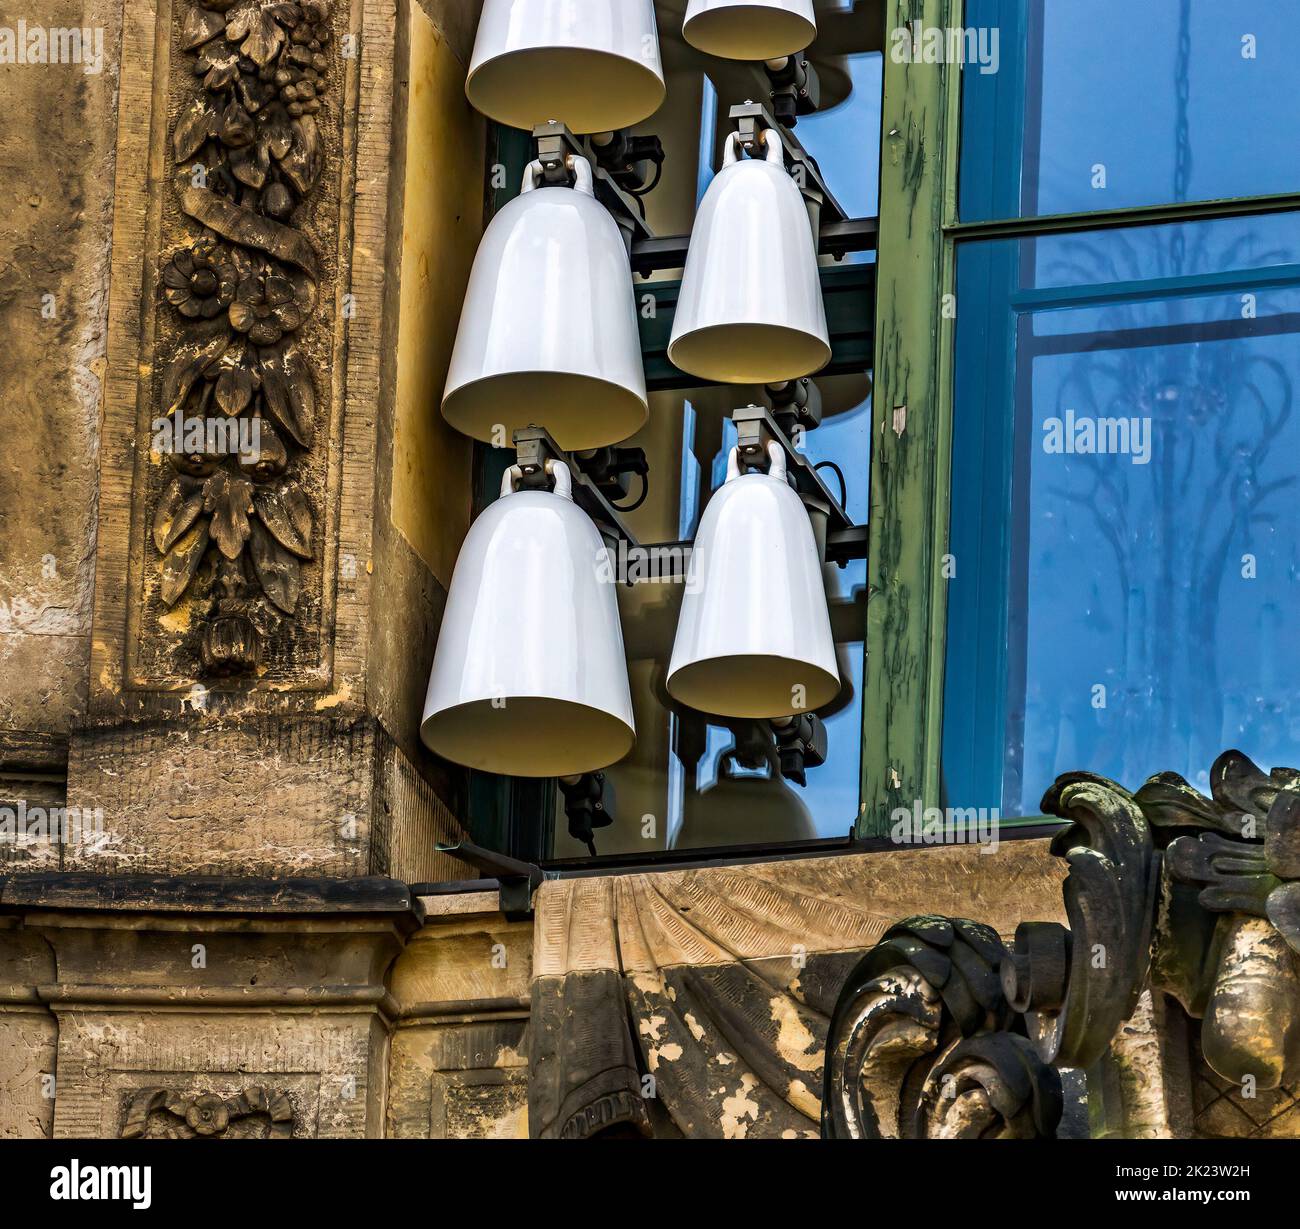 Carillon Dresden bells made of porcelain at Dresden’s Zwinger. The bells are made from Meissen porcelain Stock Photo